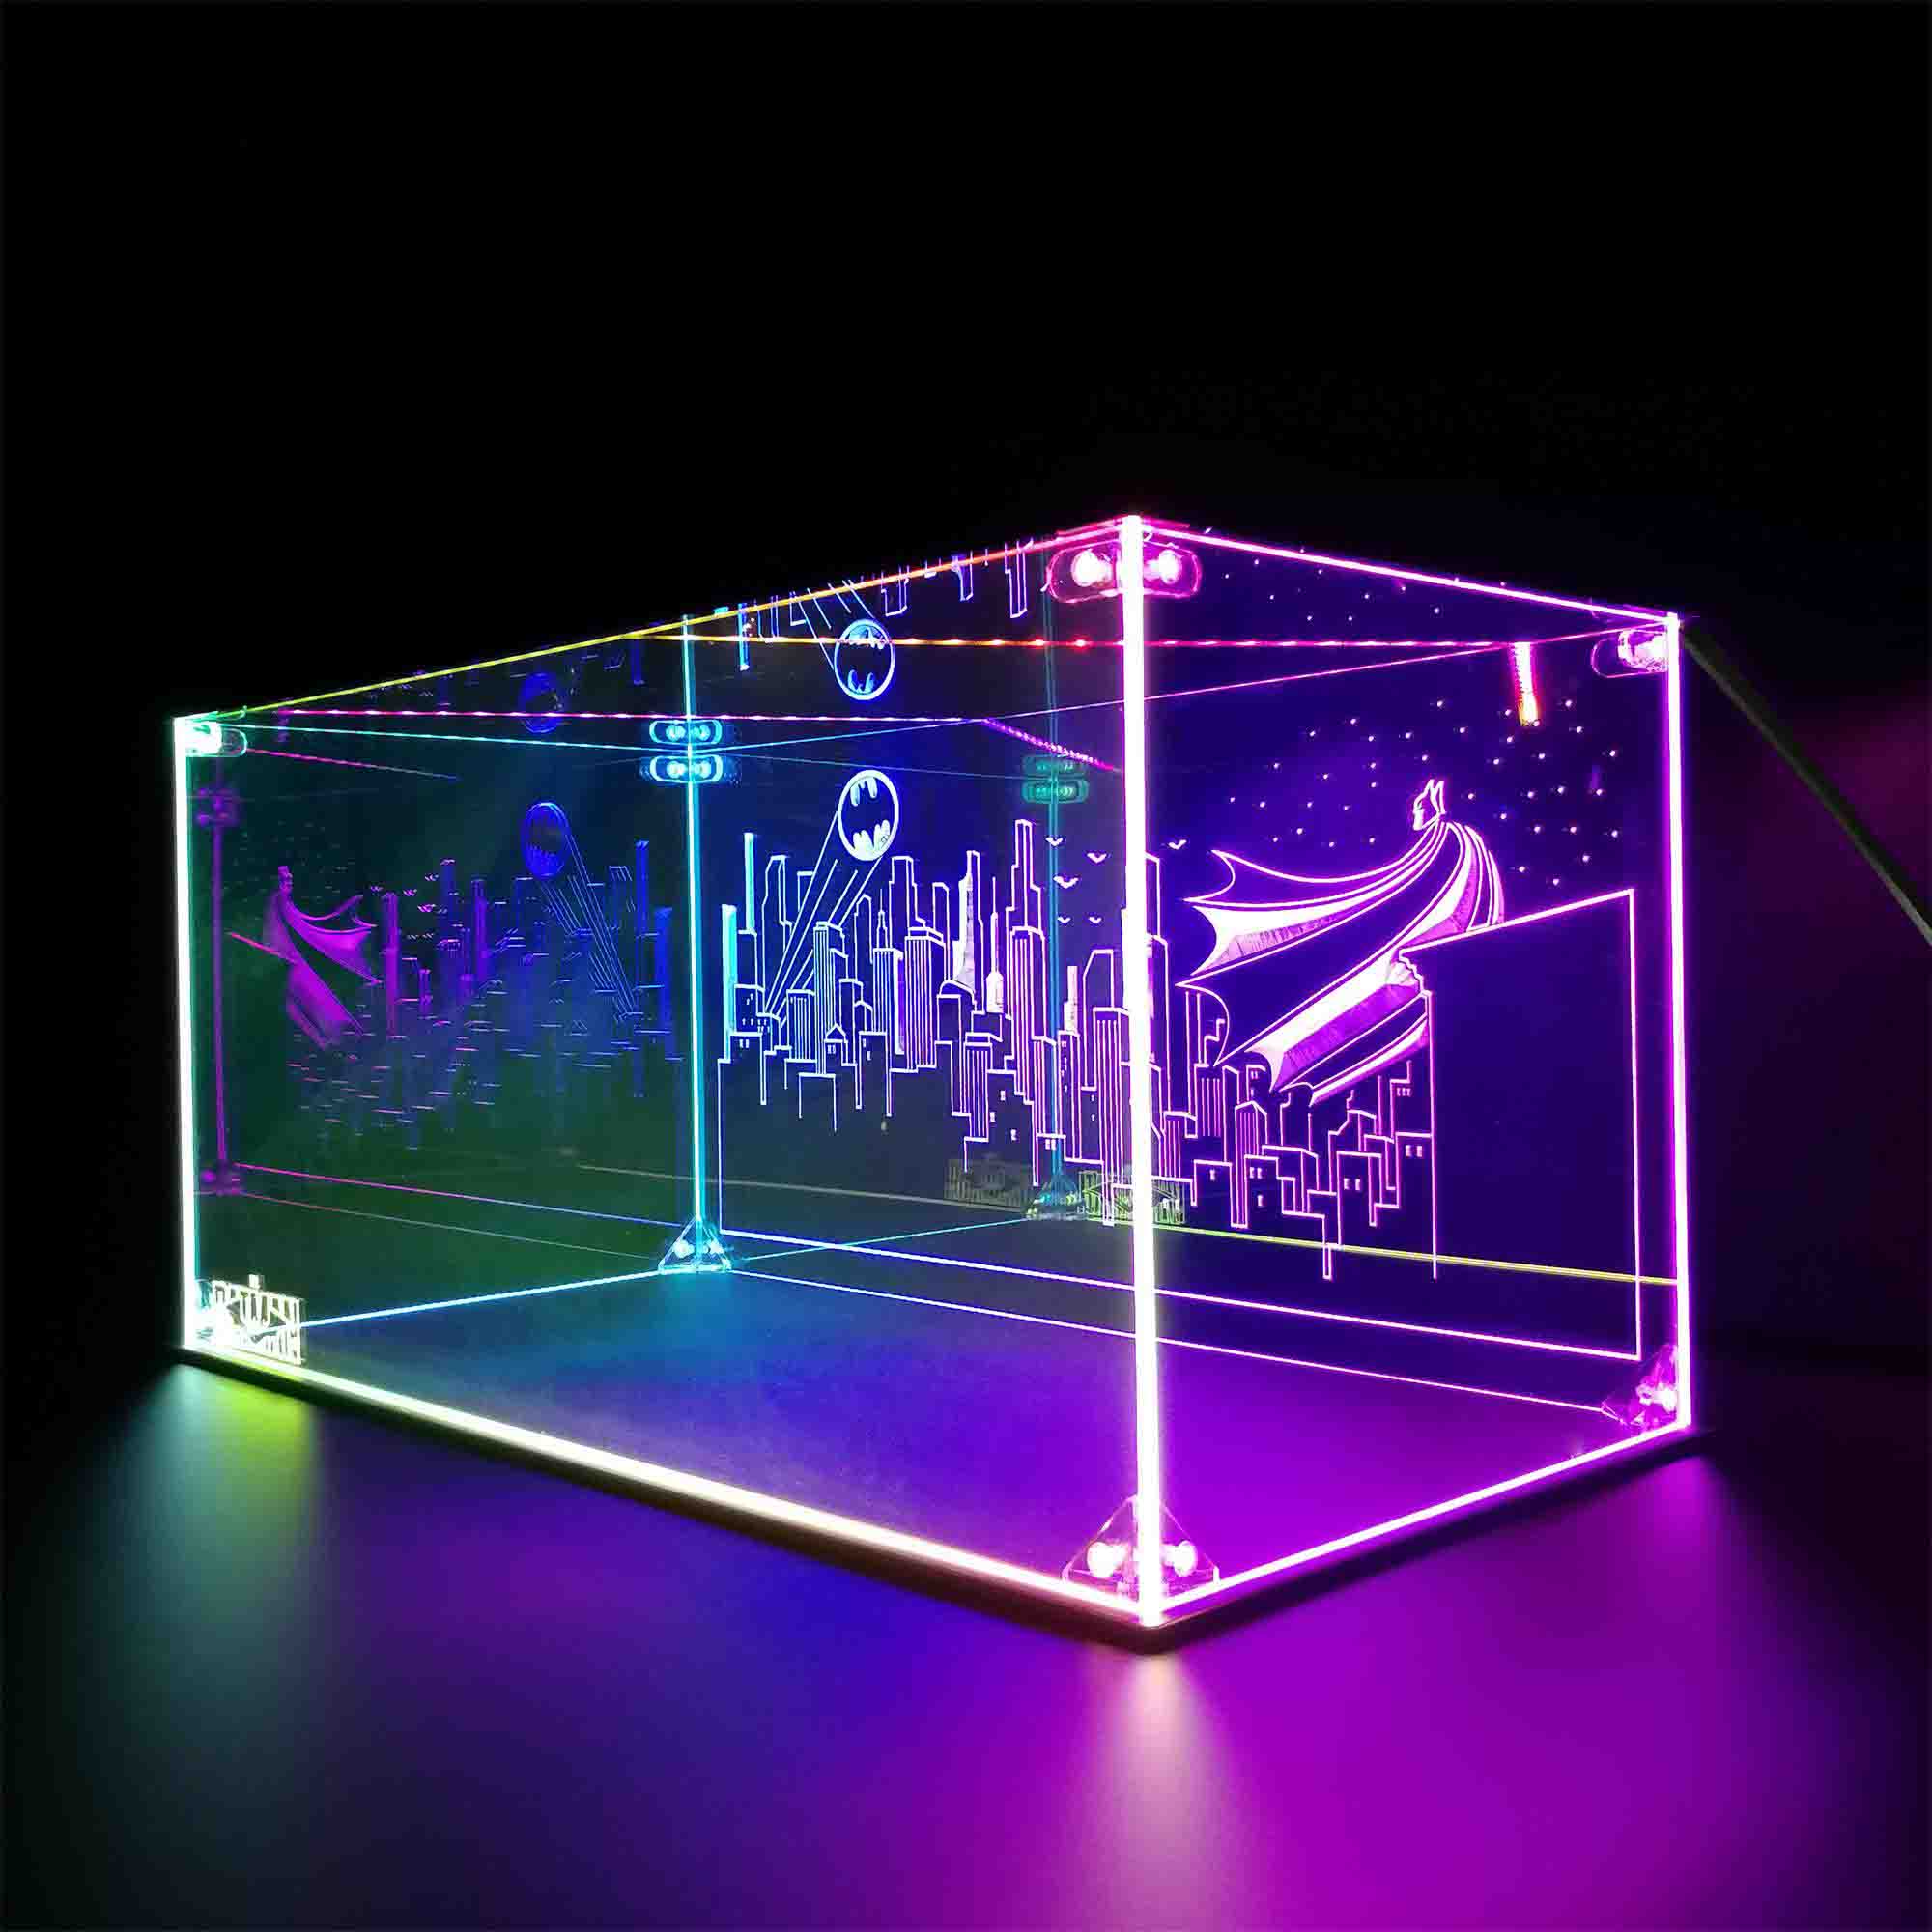 Custom LED Display Case For Lego Minifigure, Collectible Figures, Funko Pop, Diecast Car Models